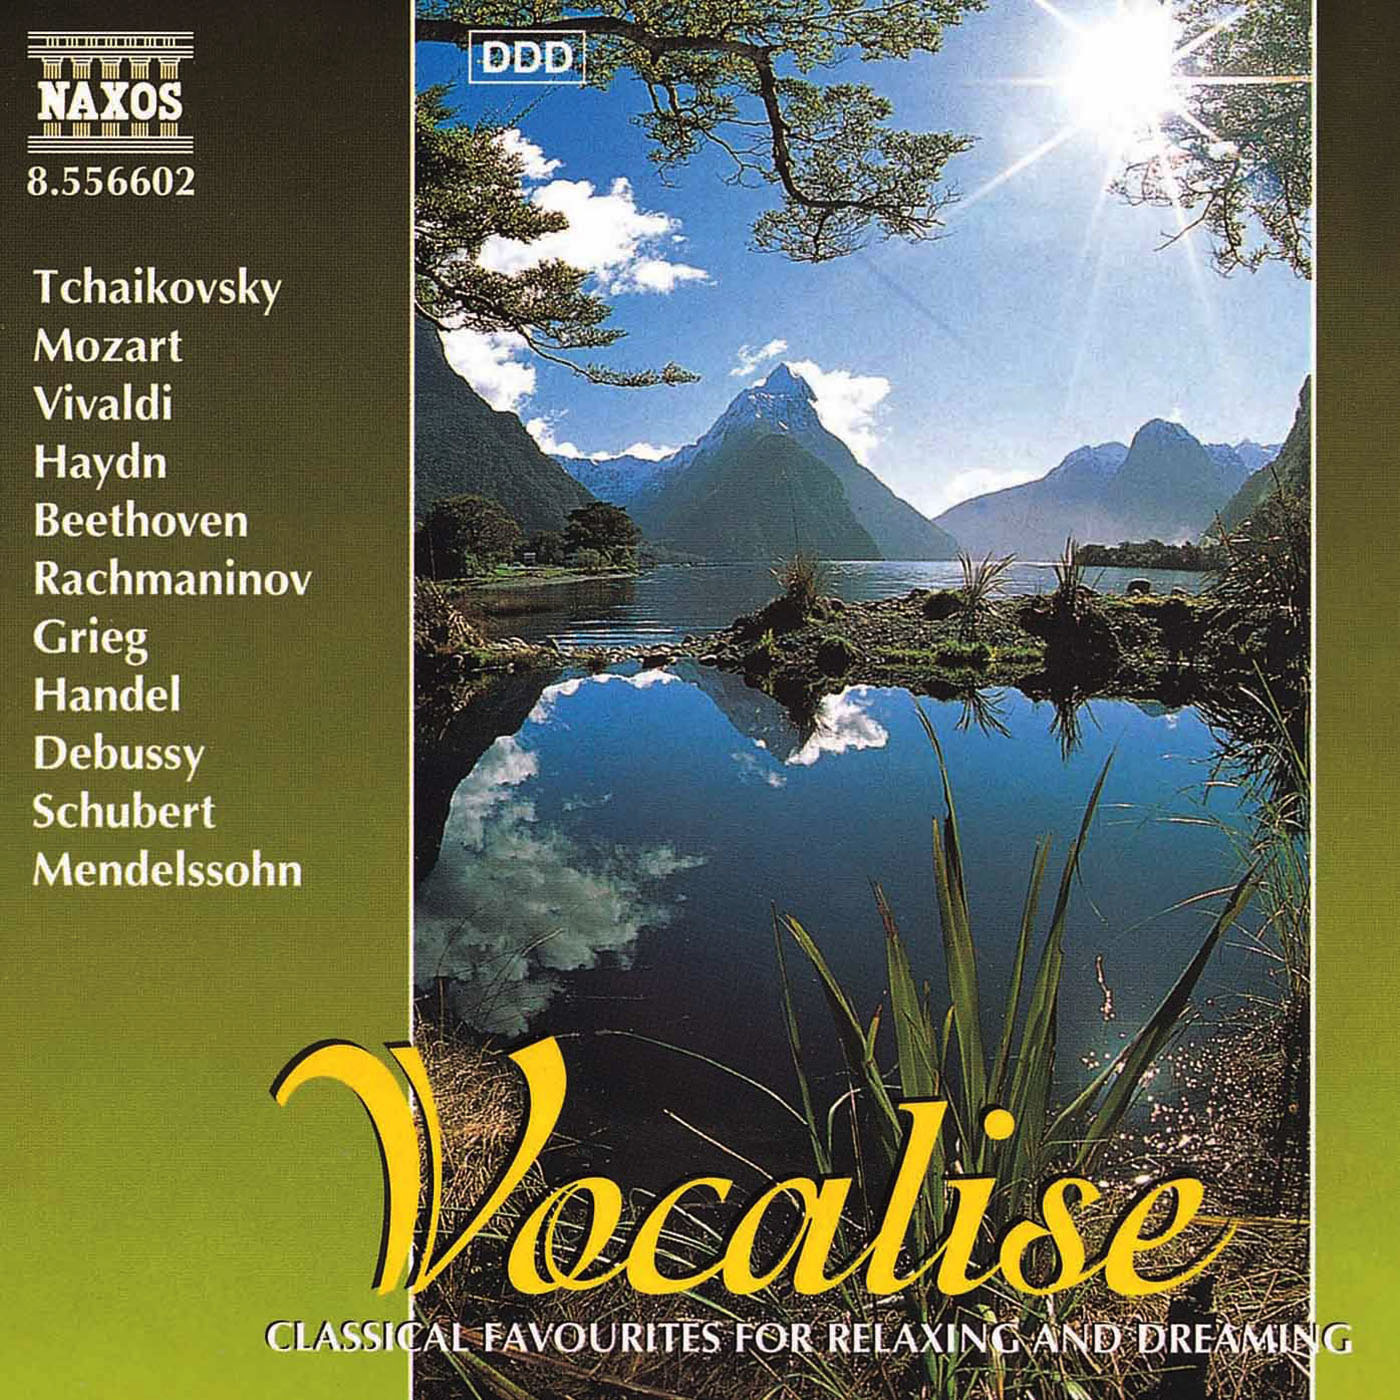 VOCALISE - Classical Favourites for Relaxing and Dreaming